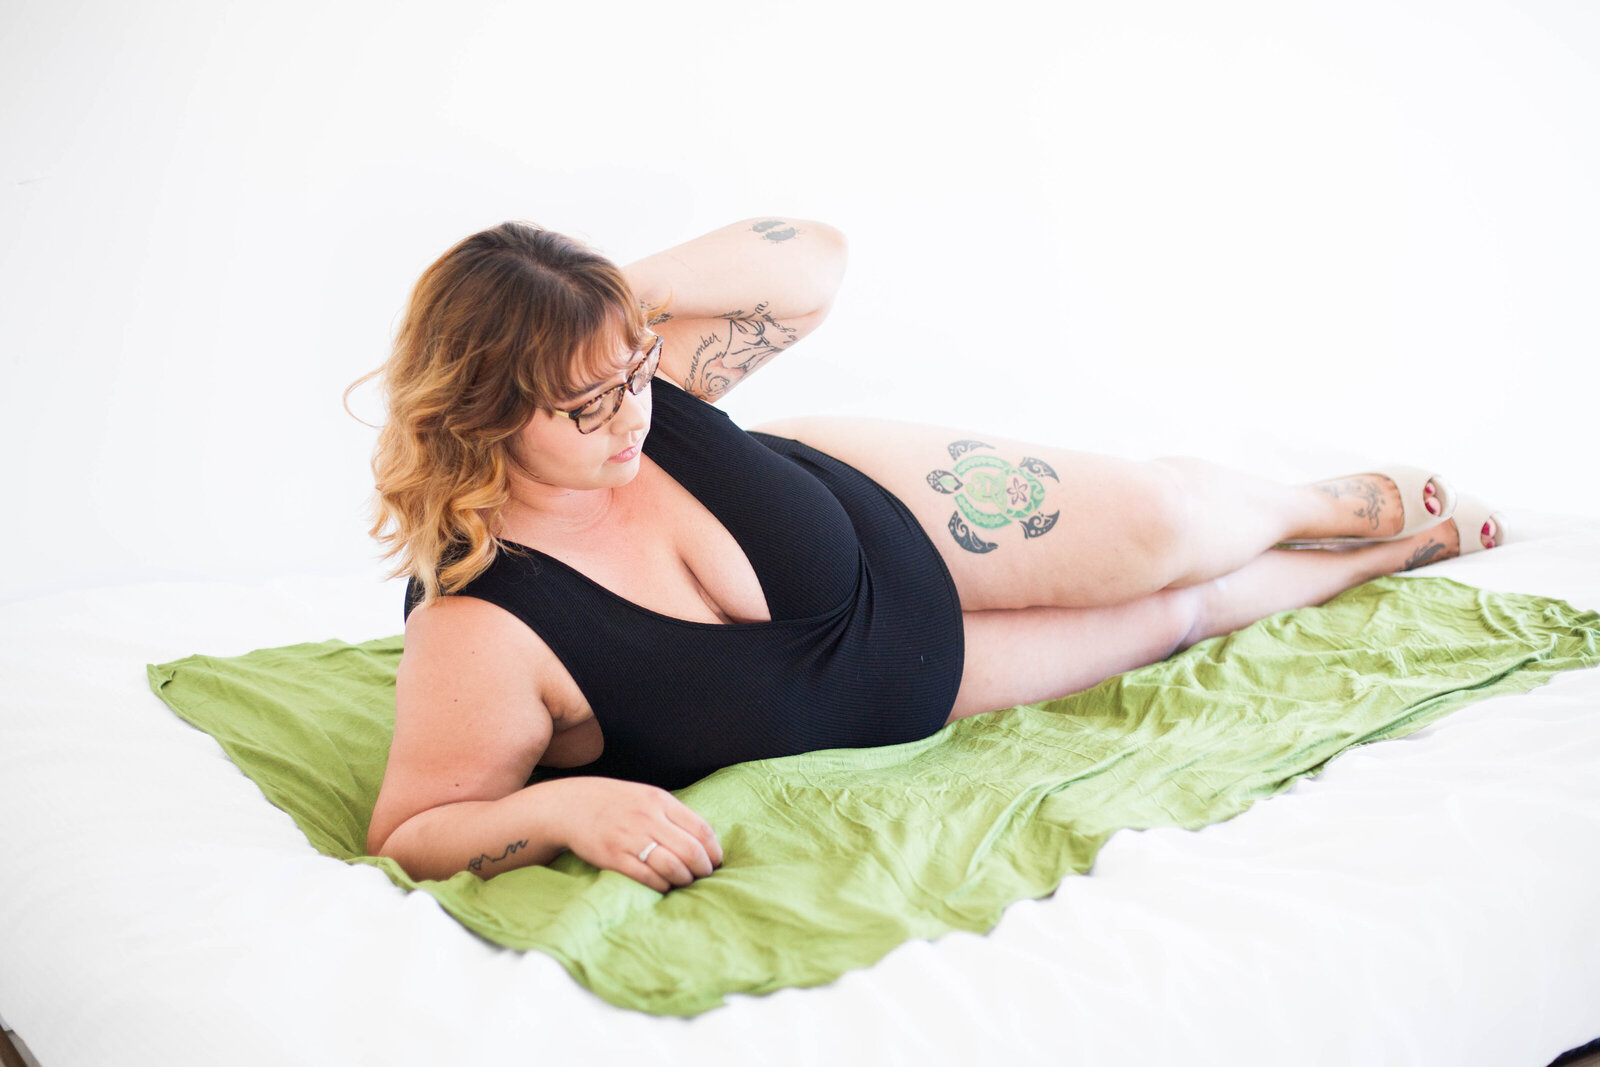 A woman in black lingerie on a green blanket in a white room.